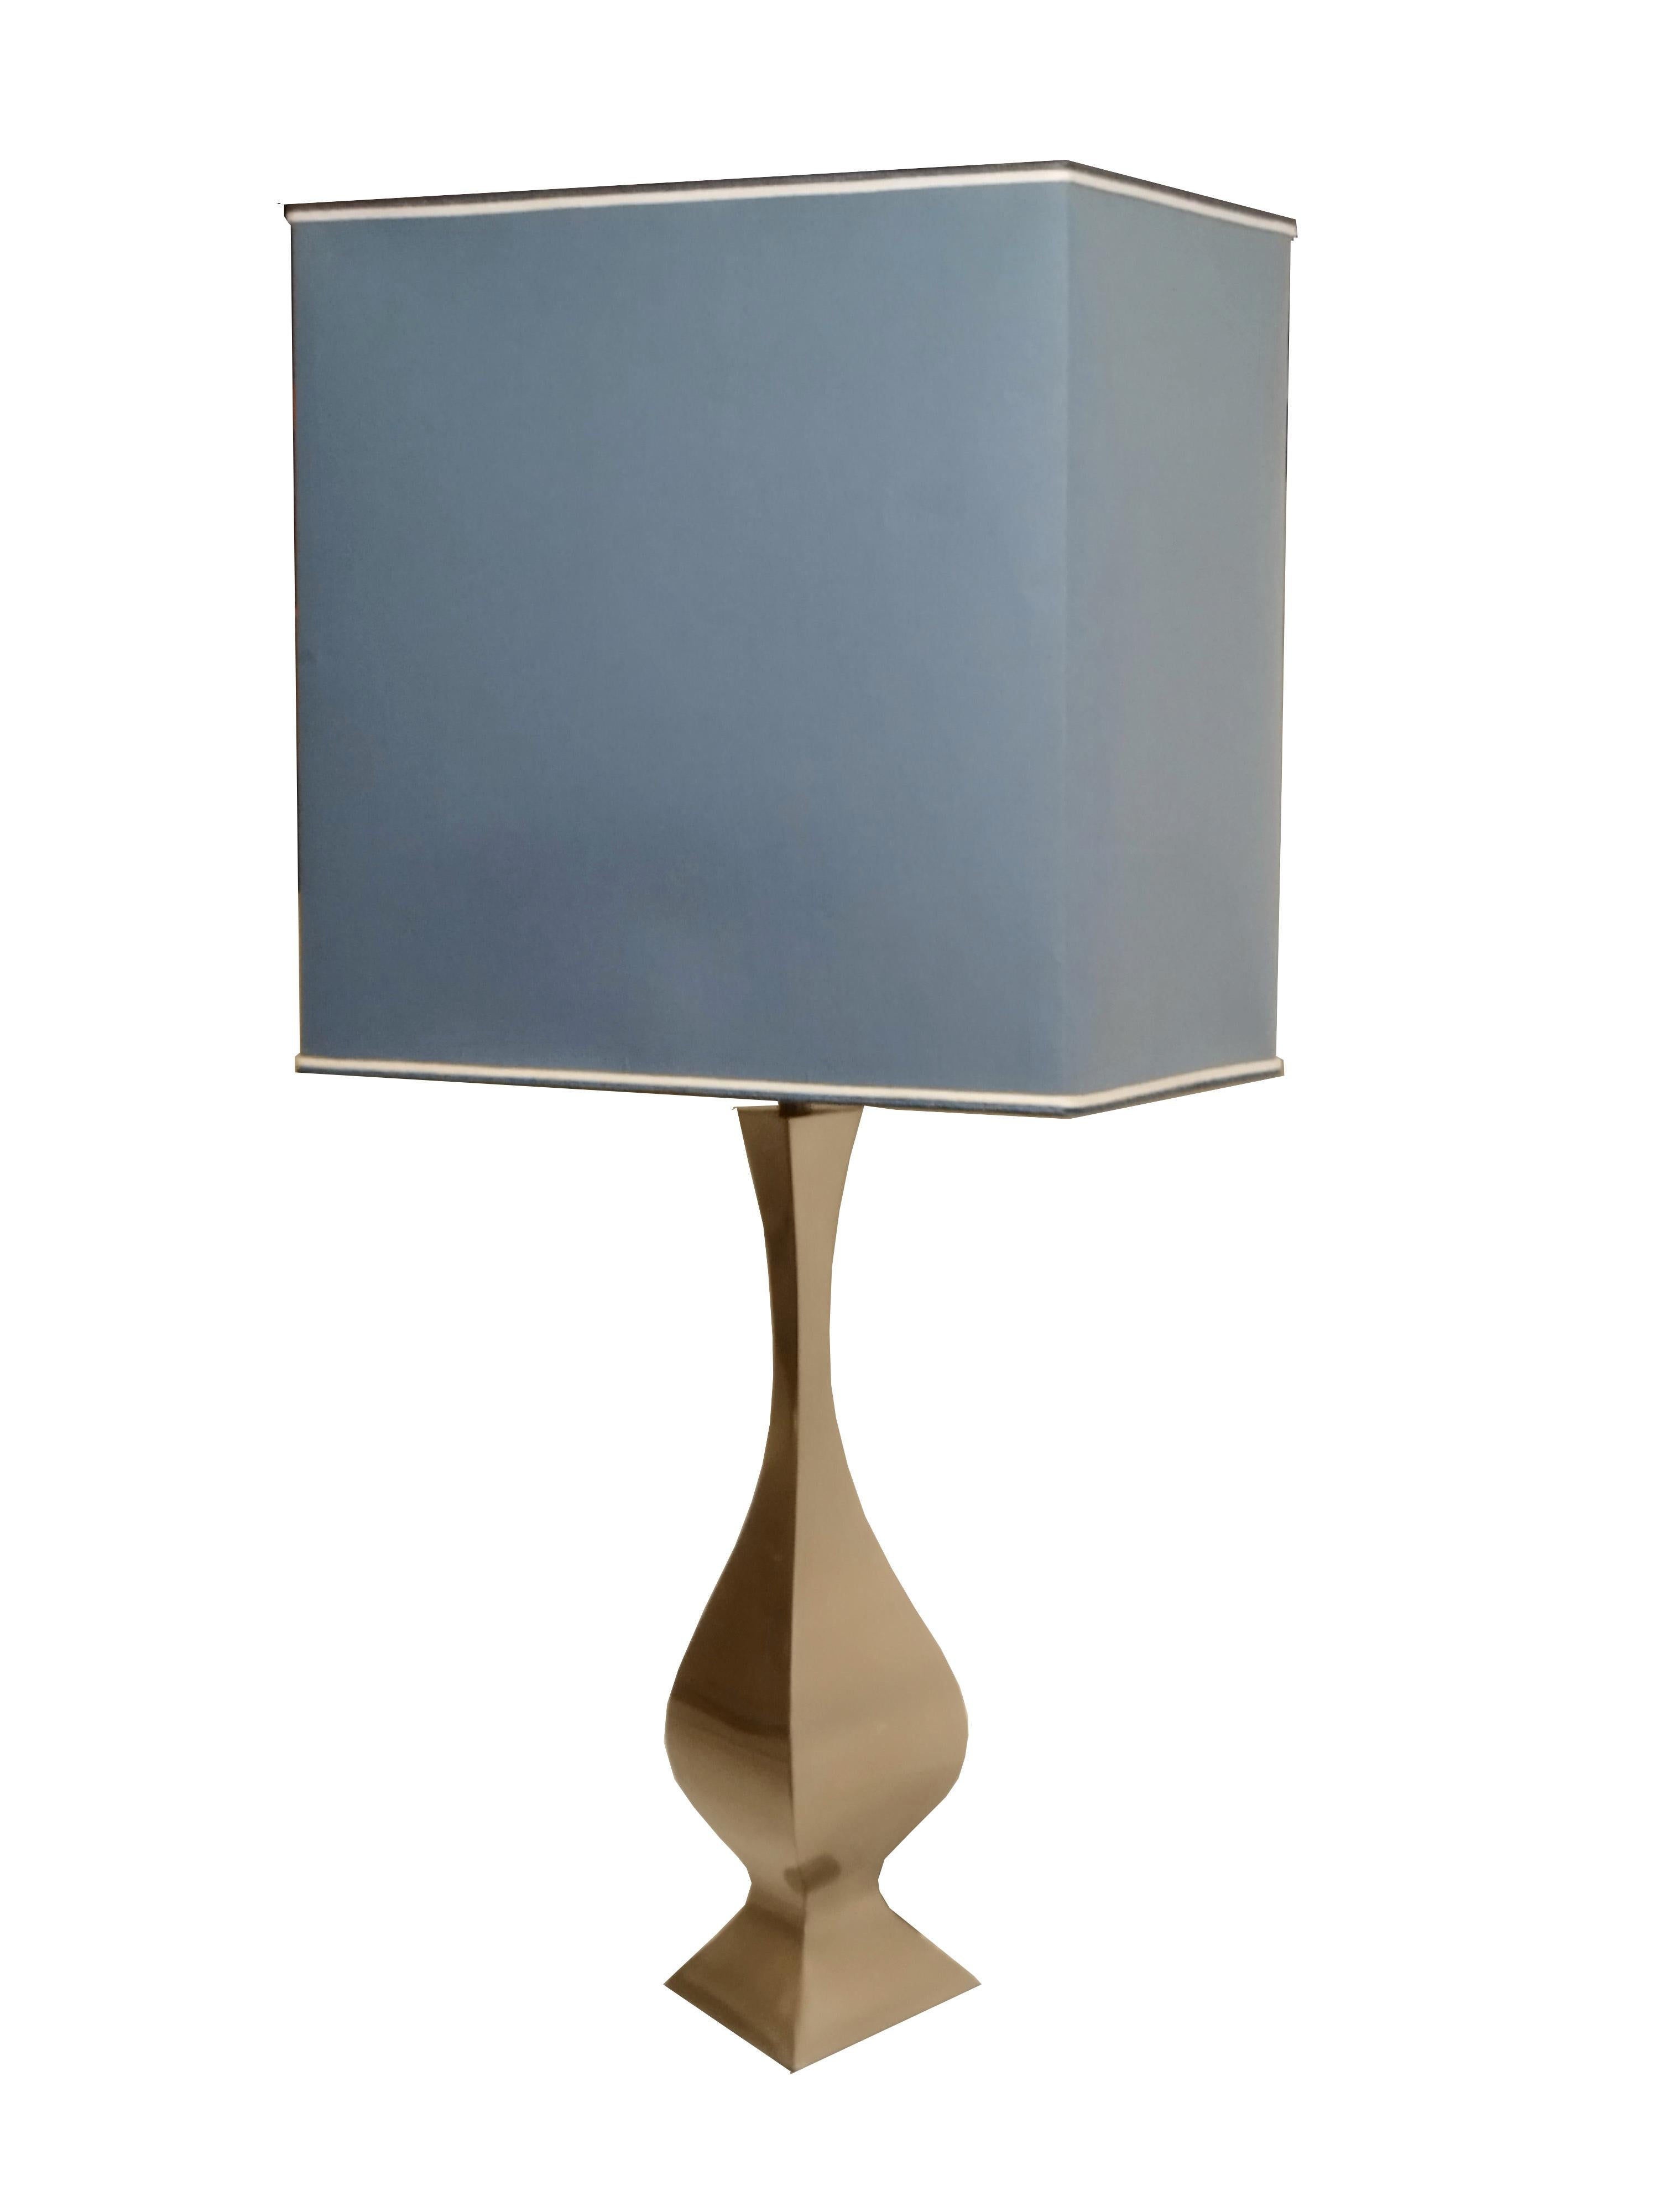 Italian Montagna Grillo and Tonello for High Society Brass Table Lamp, Italy 1970s